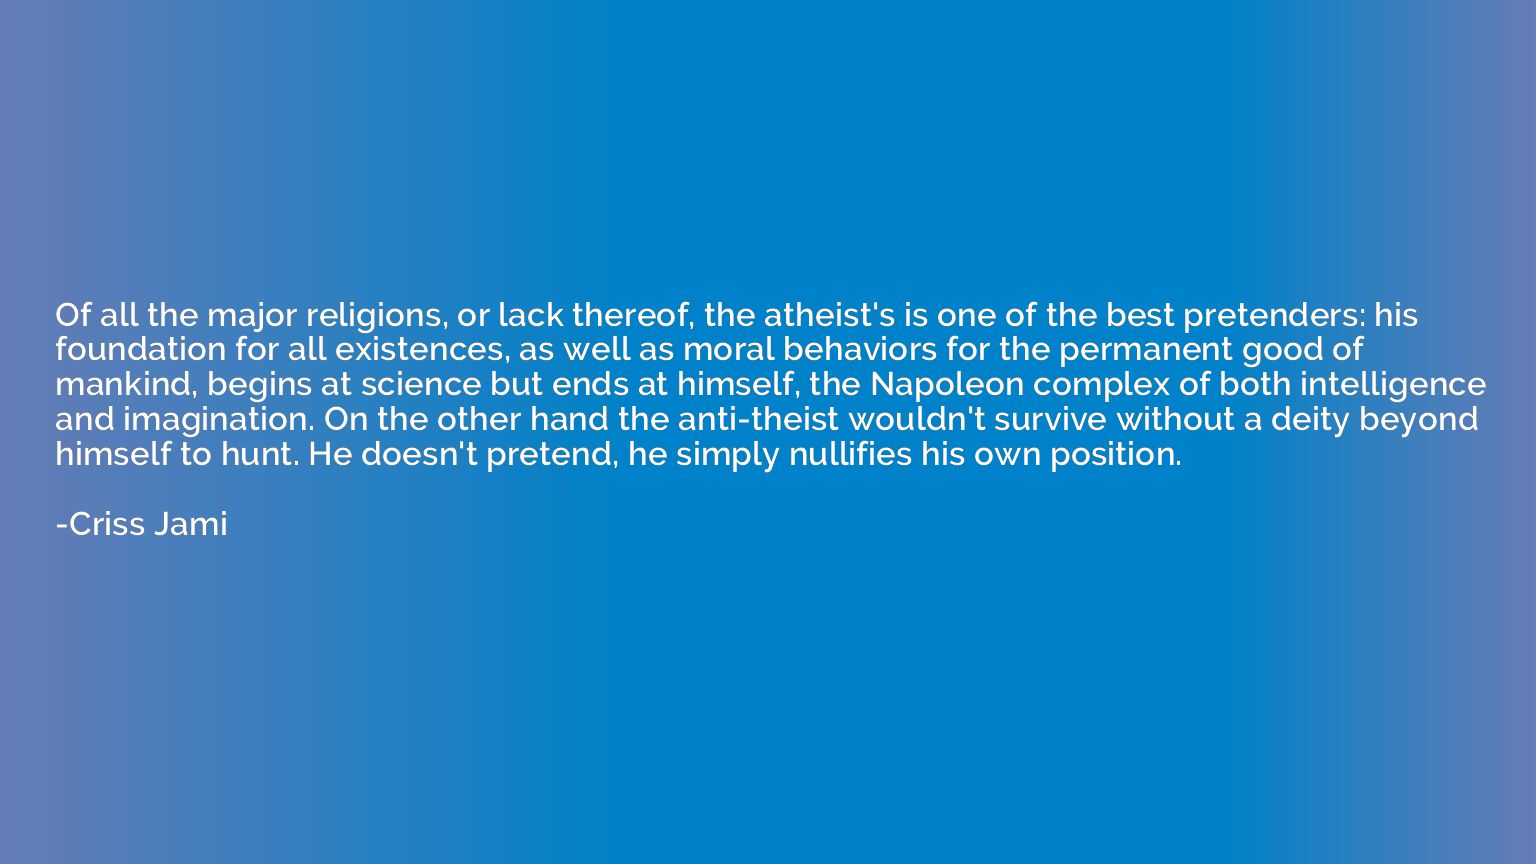 Of all the major religions, or lack thereof, the atheist's i